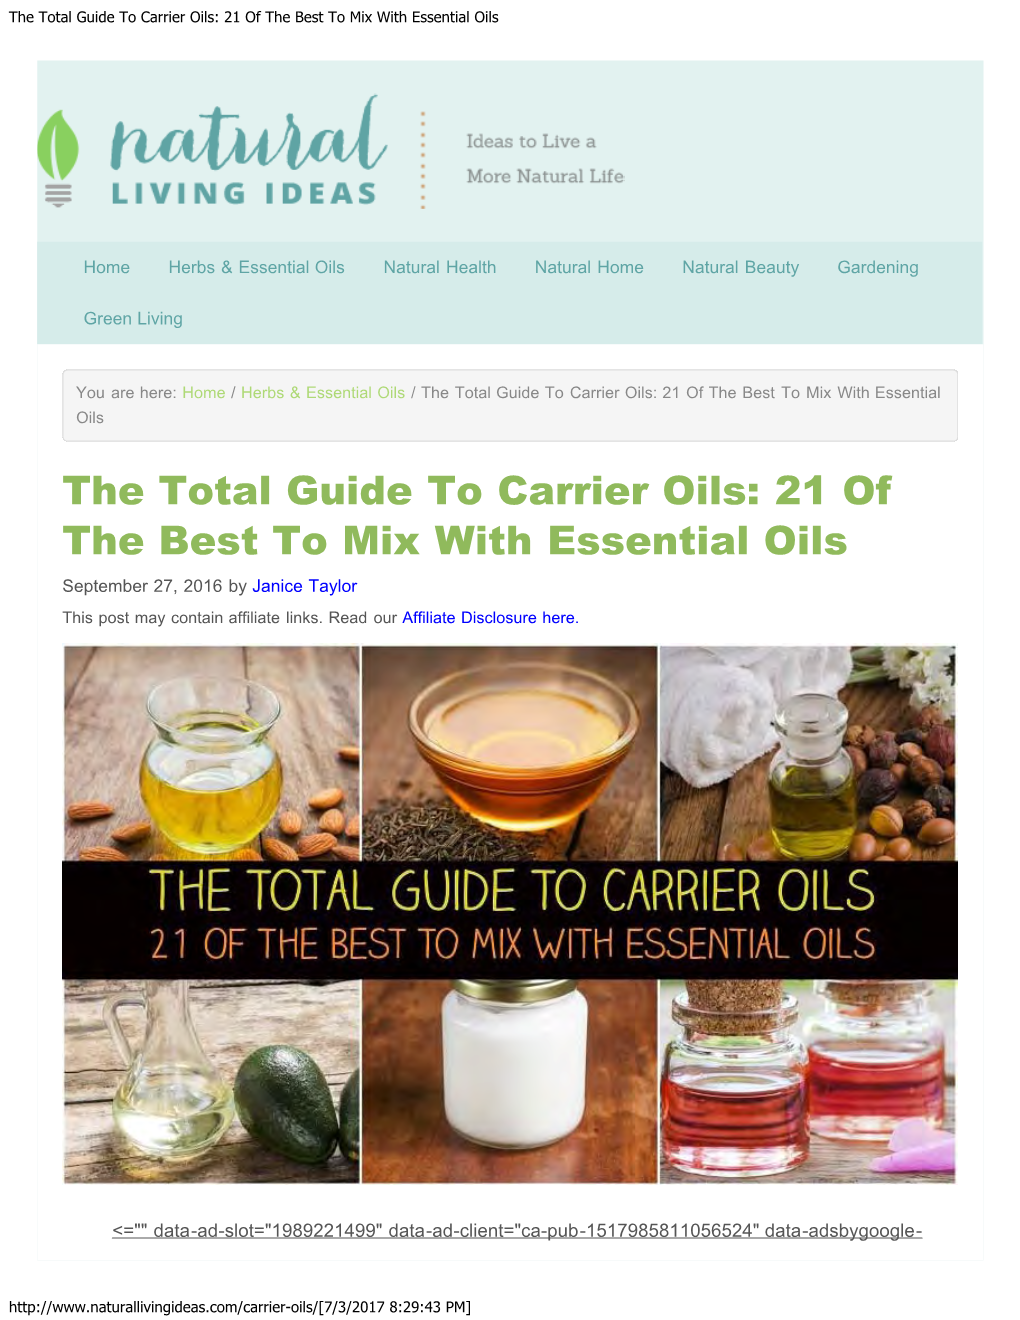 The Total Guide to Carrier Oils: 21 of the Best to Mix with Essential Oils